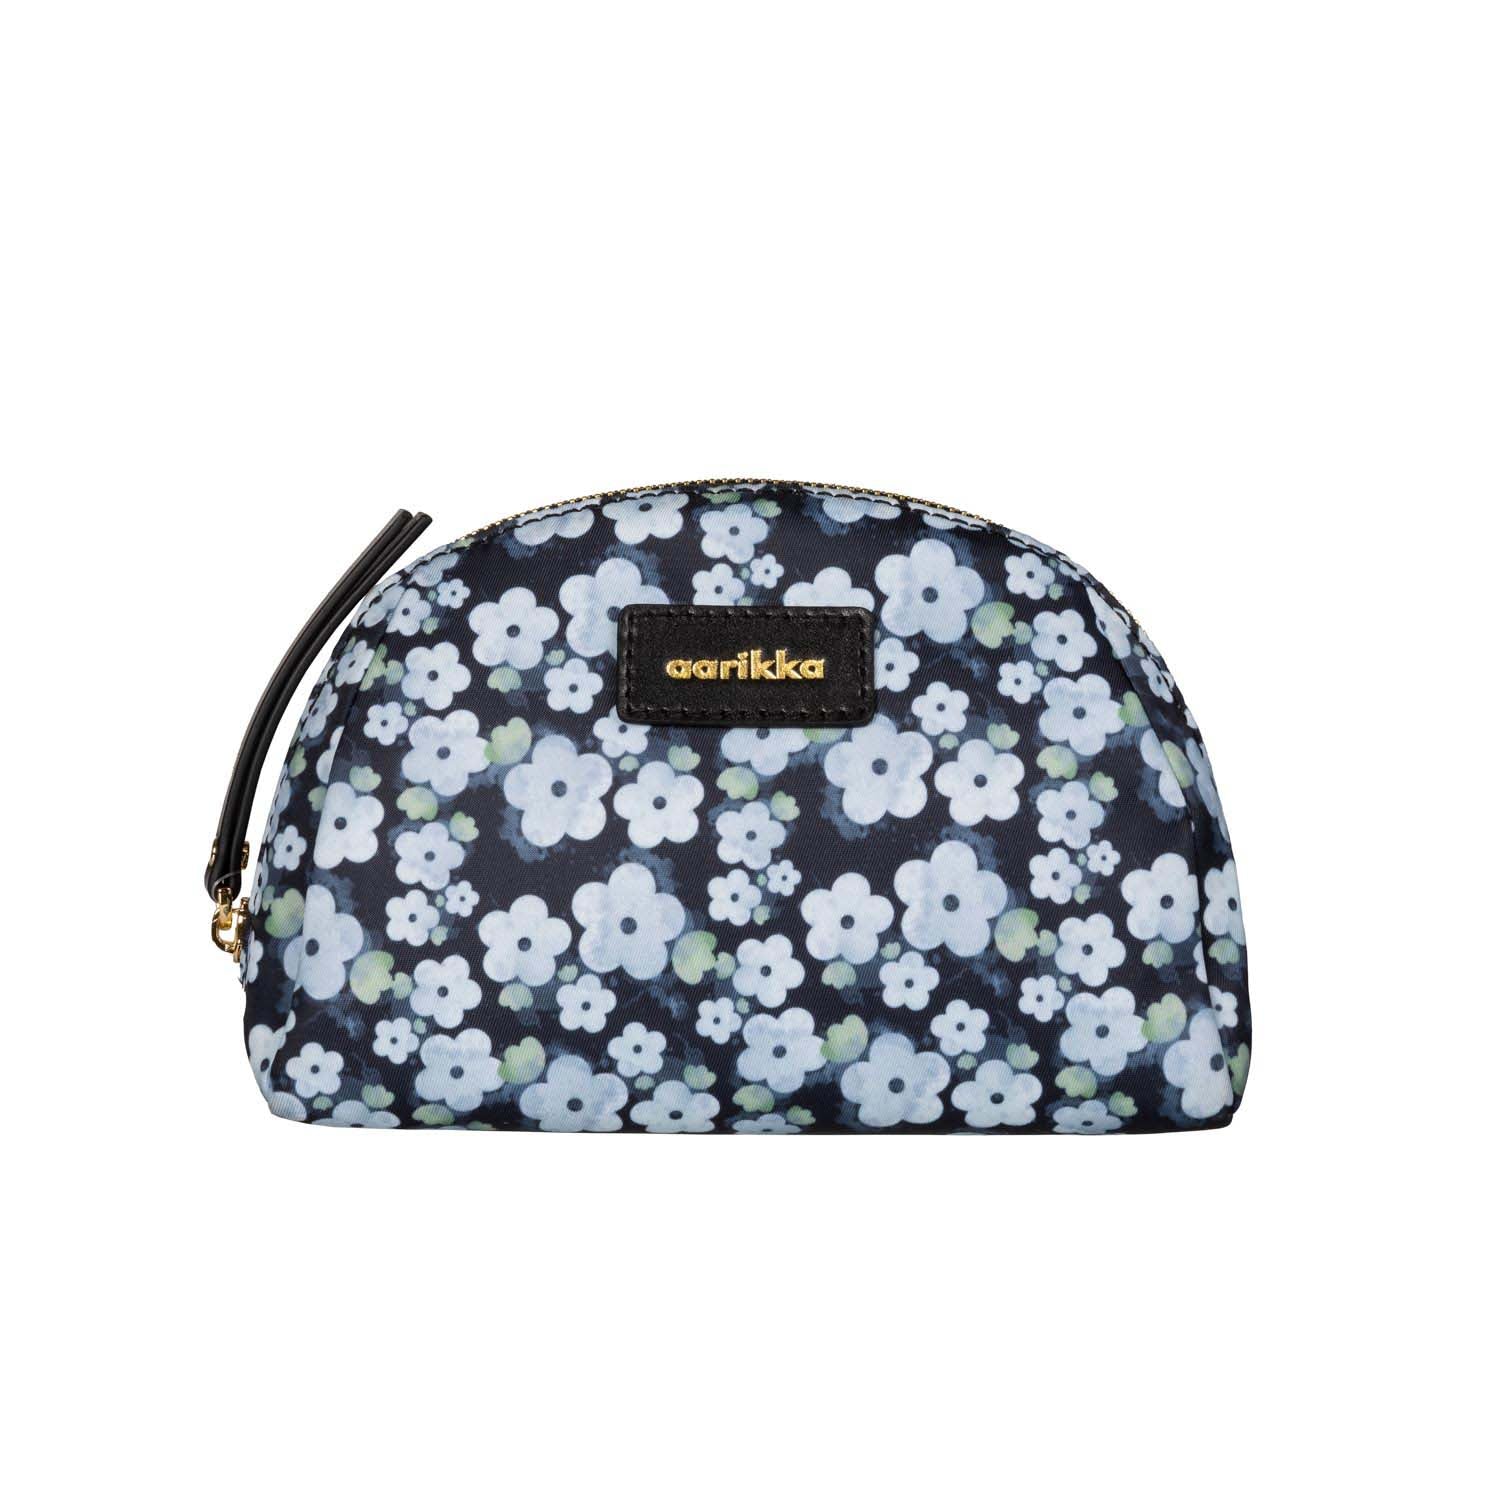 Inka cosmetic bag, forget-me-not